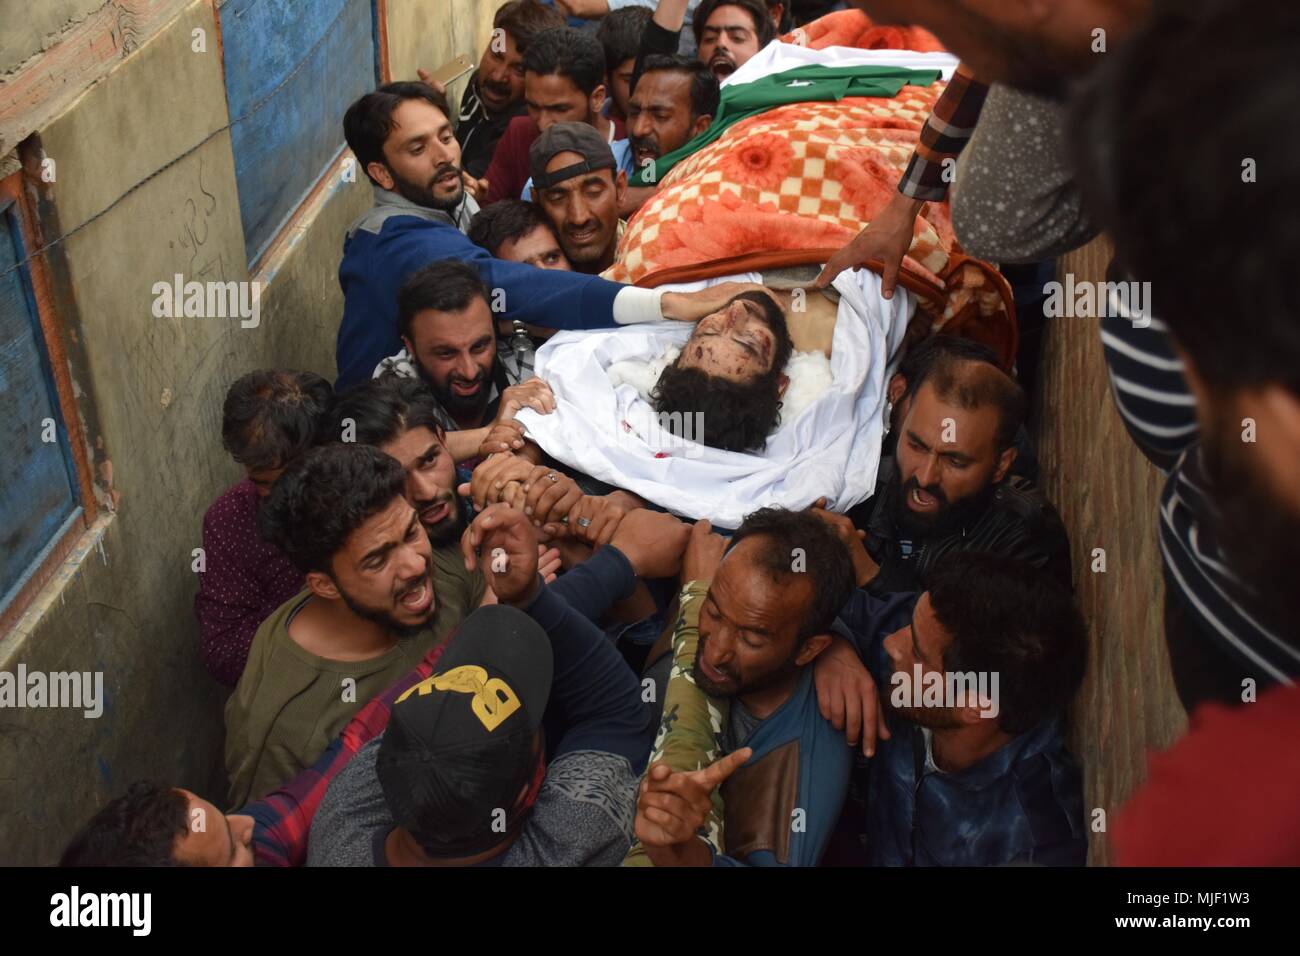 Srinagar, Jammu & Kashmir, India, May 5, 2018.  (EDITORS NOTE: Image depicts death.).Multiple Funeral processions held in srinagar summer capital of Indian Kashmir on Saturday of Fayaz Ahmed Hamal a LeT (Lashkar-e-Taiba) Militant and a Civilian Adil Ahmed Yatoo who were killed by armoured vehicle on Saturday during clashes near Encounter site. in an encounter between Indian forces and militants at chatabal area of Srinagar summer capit Credit: ZUMA Press, Inc./Alamy Live News Stock Photo